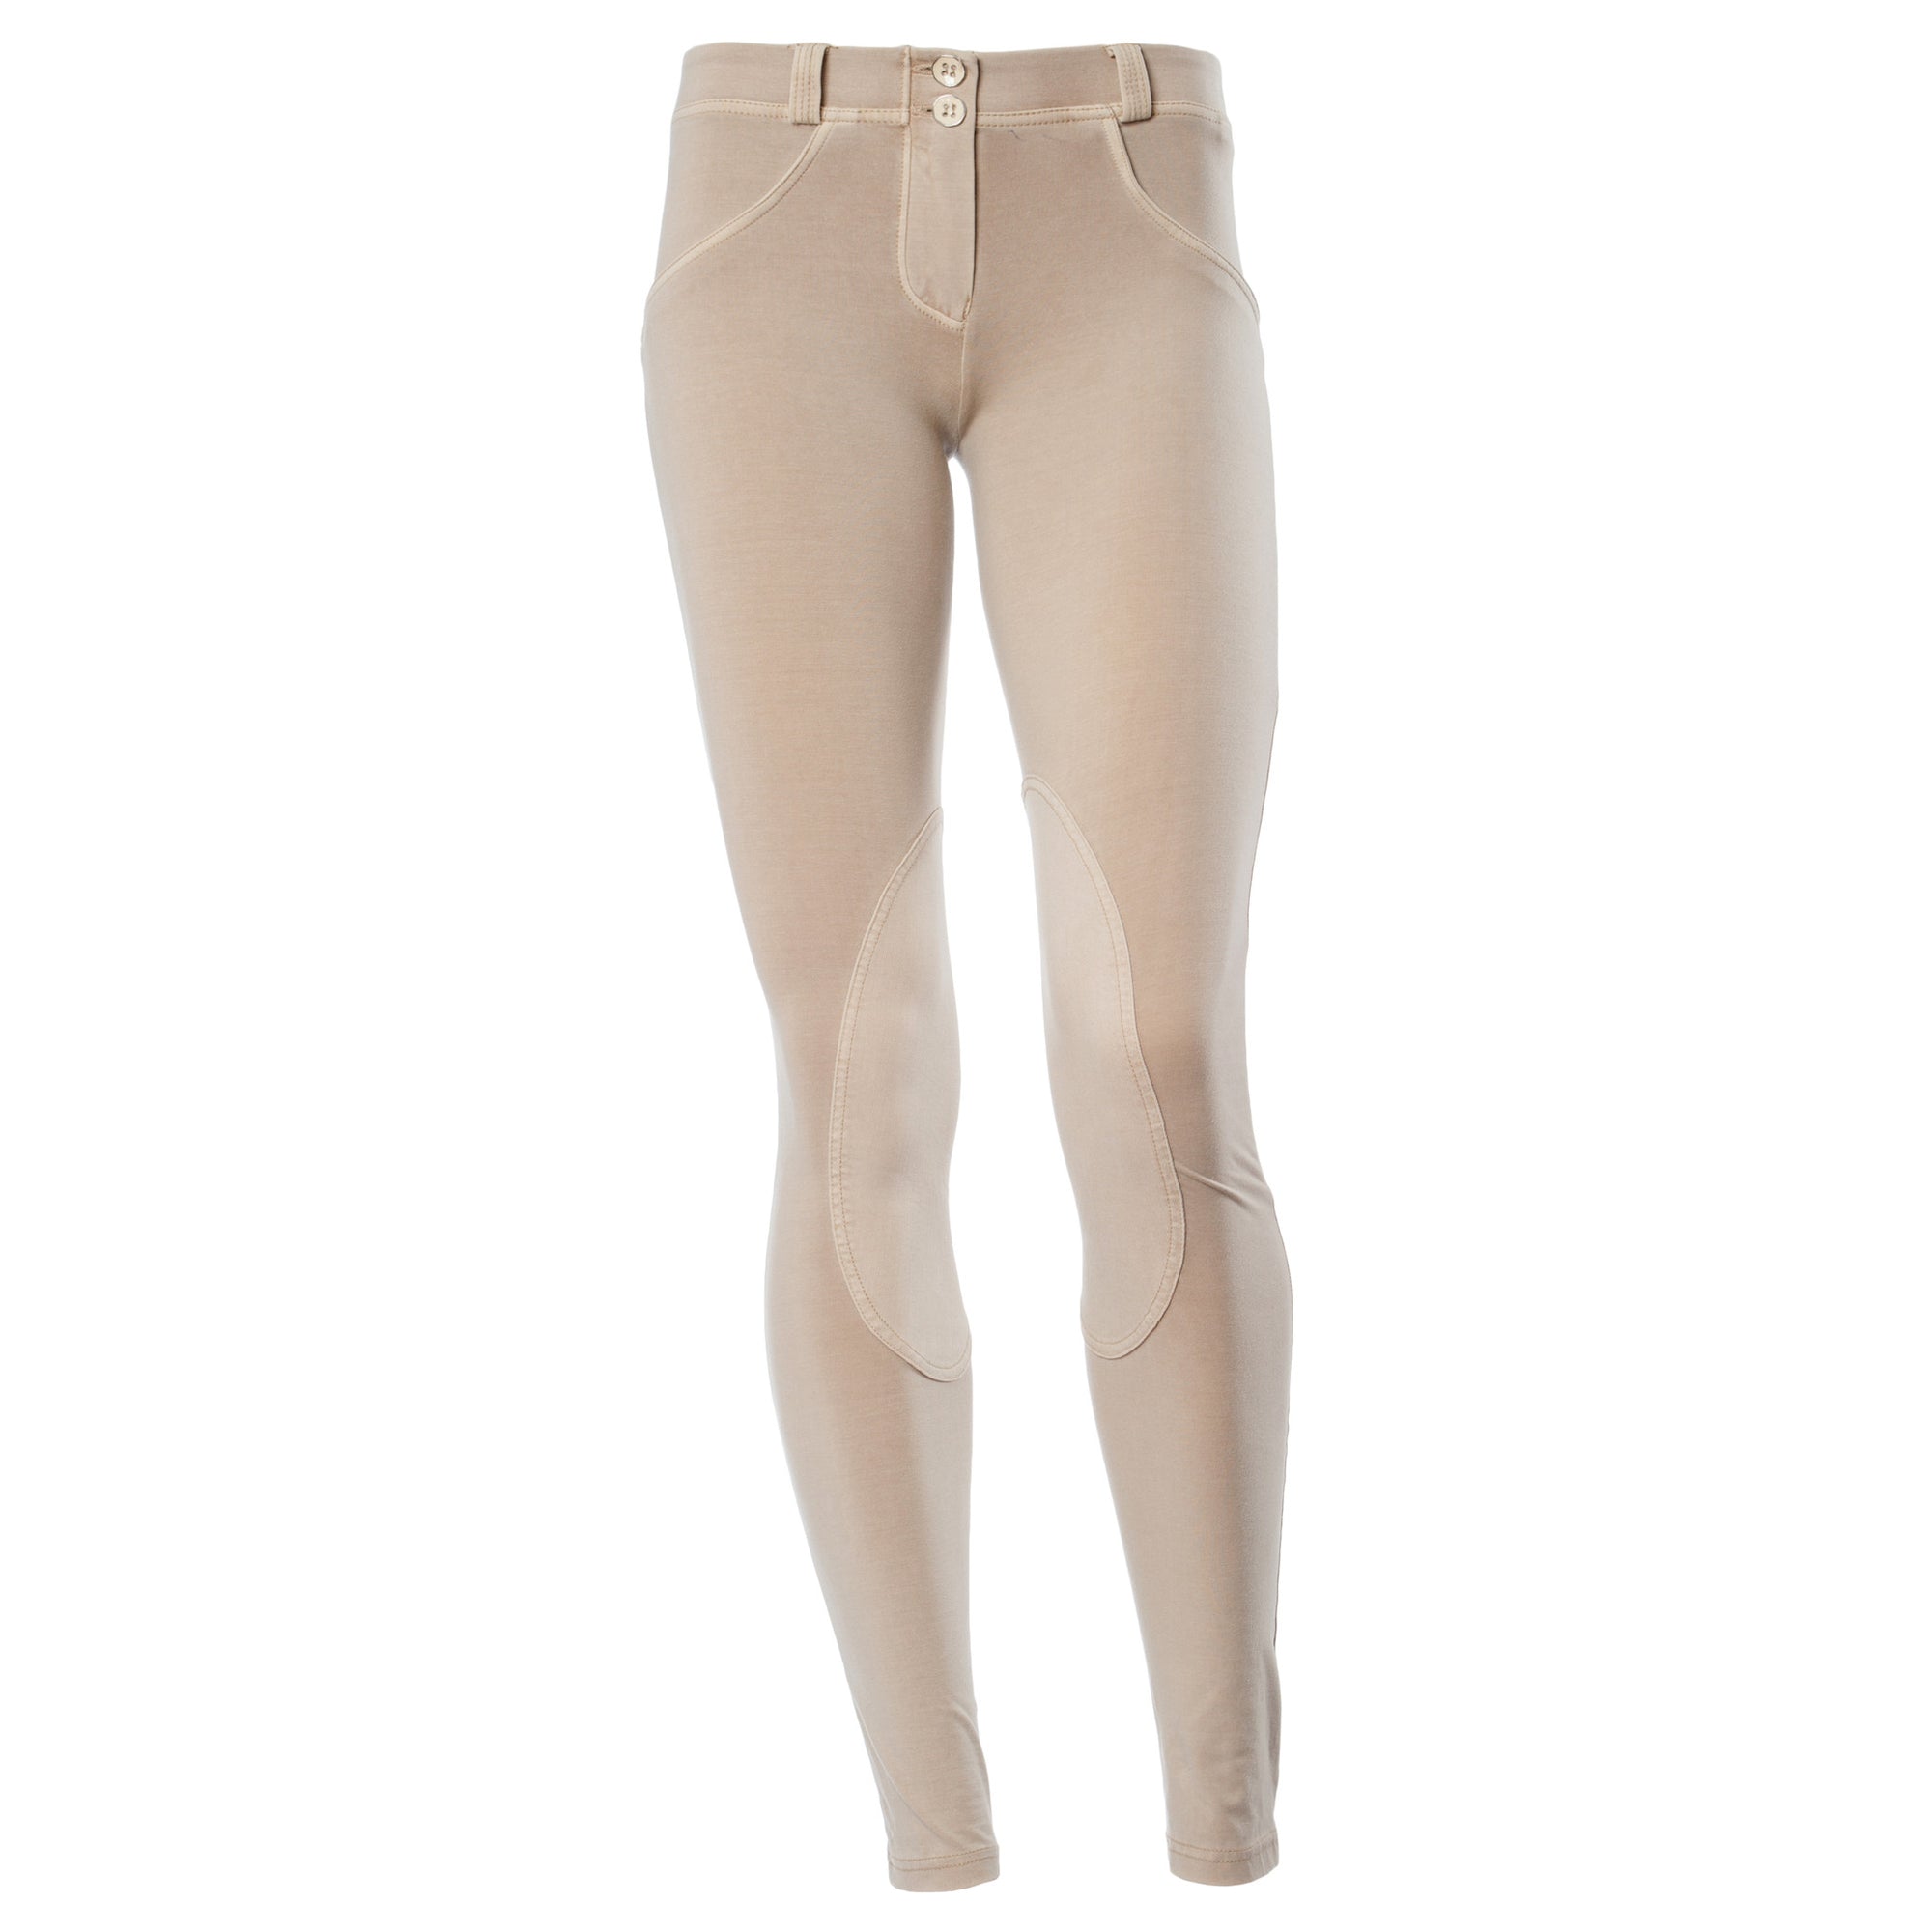 FREDDY WR.UP  WASHED RIDING PANT - Beige - LIVIFY
 - 2